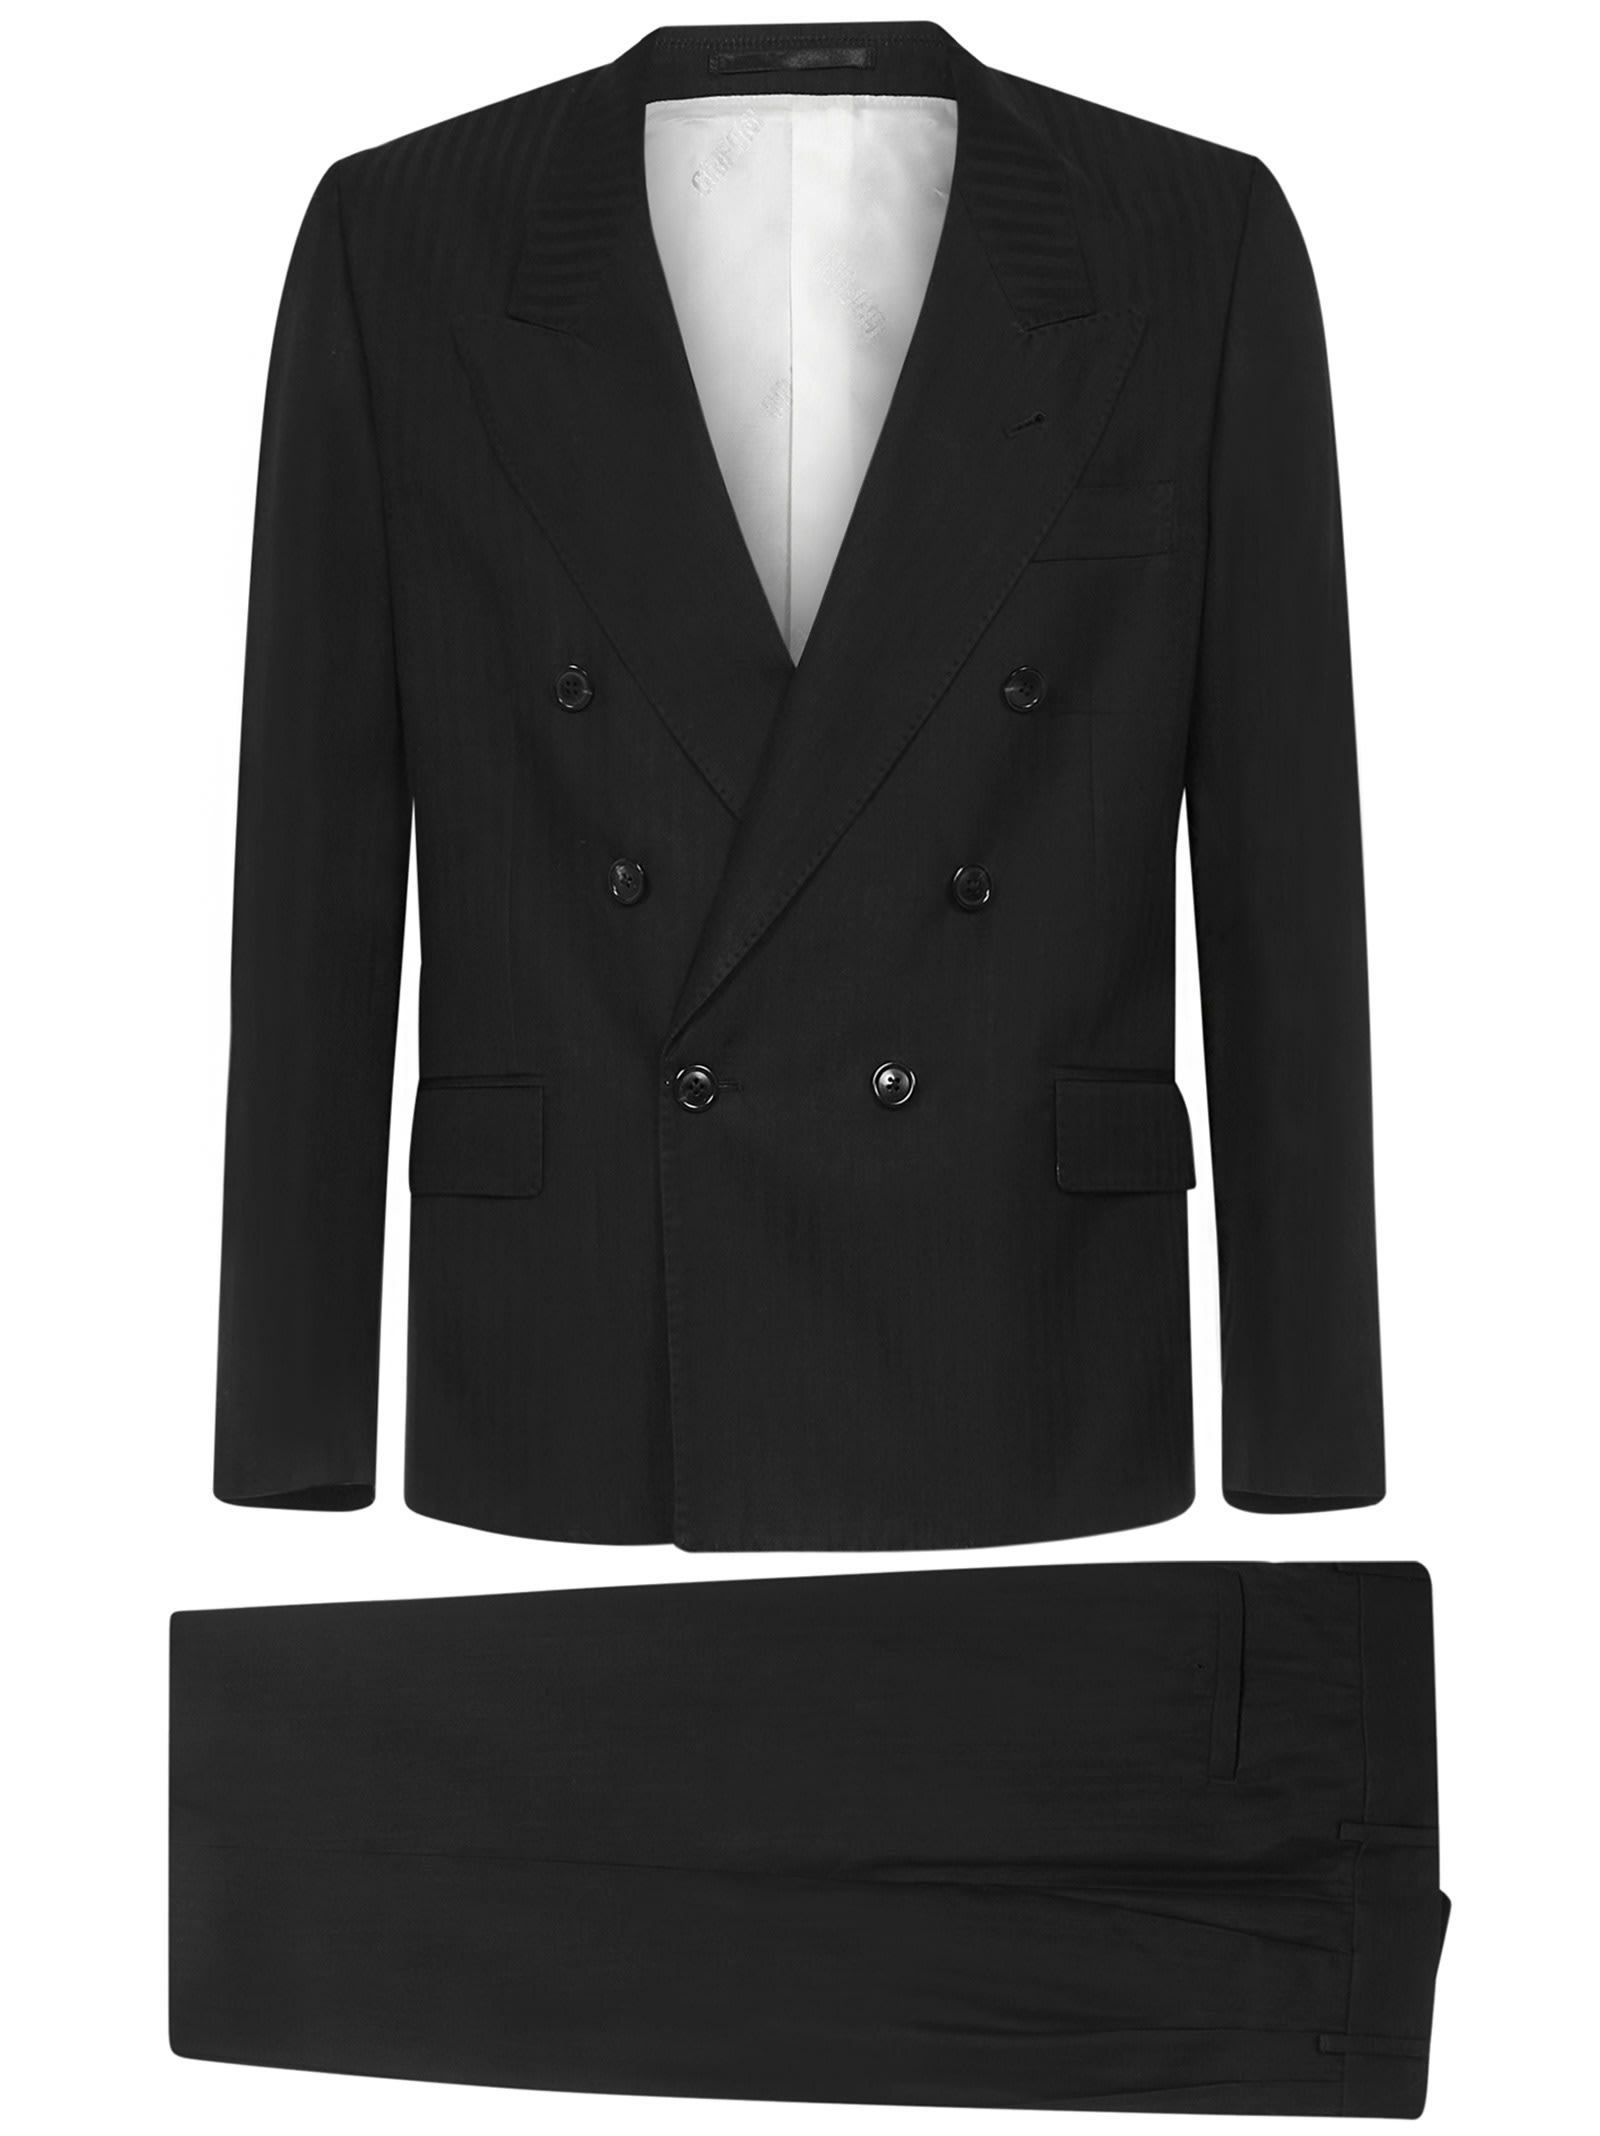 Mauro Grifoni Grifoni Suit In Black